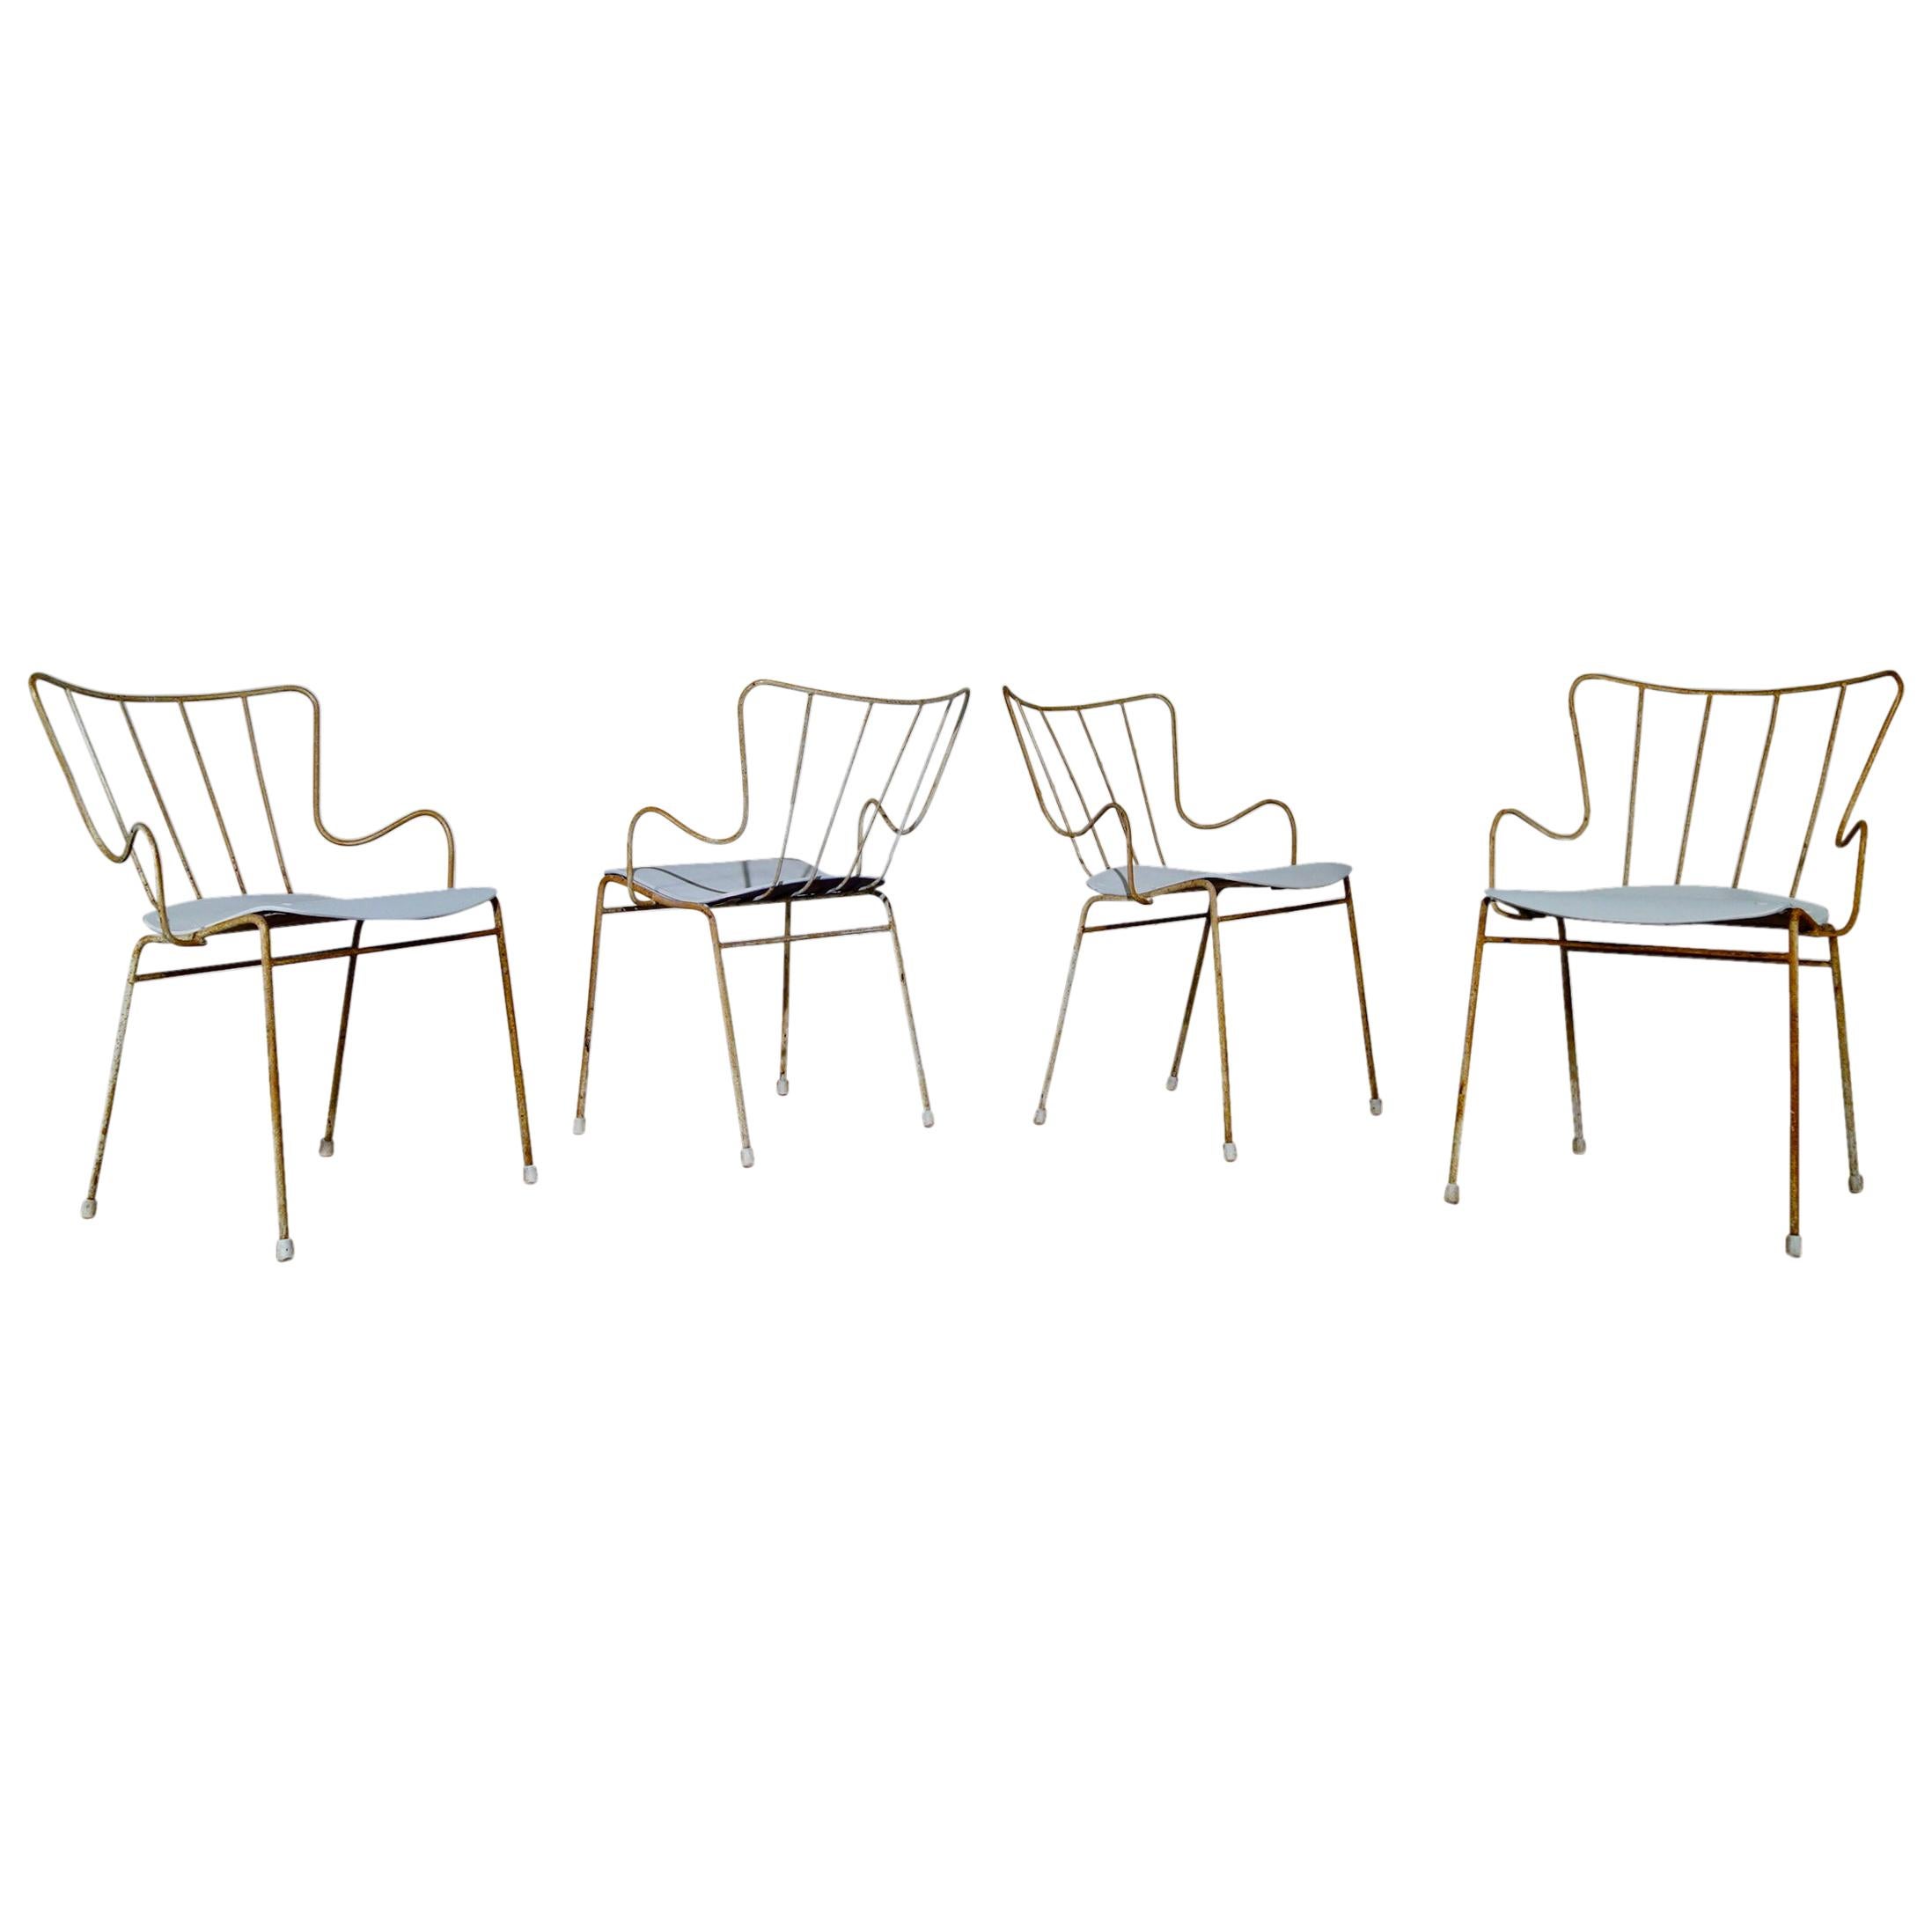 A Set of Four Vintage Ernest Race Antelope Chairs Painted Outdoor Dining Garden